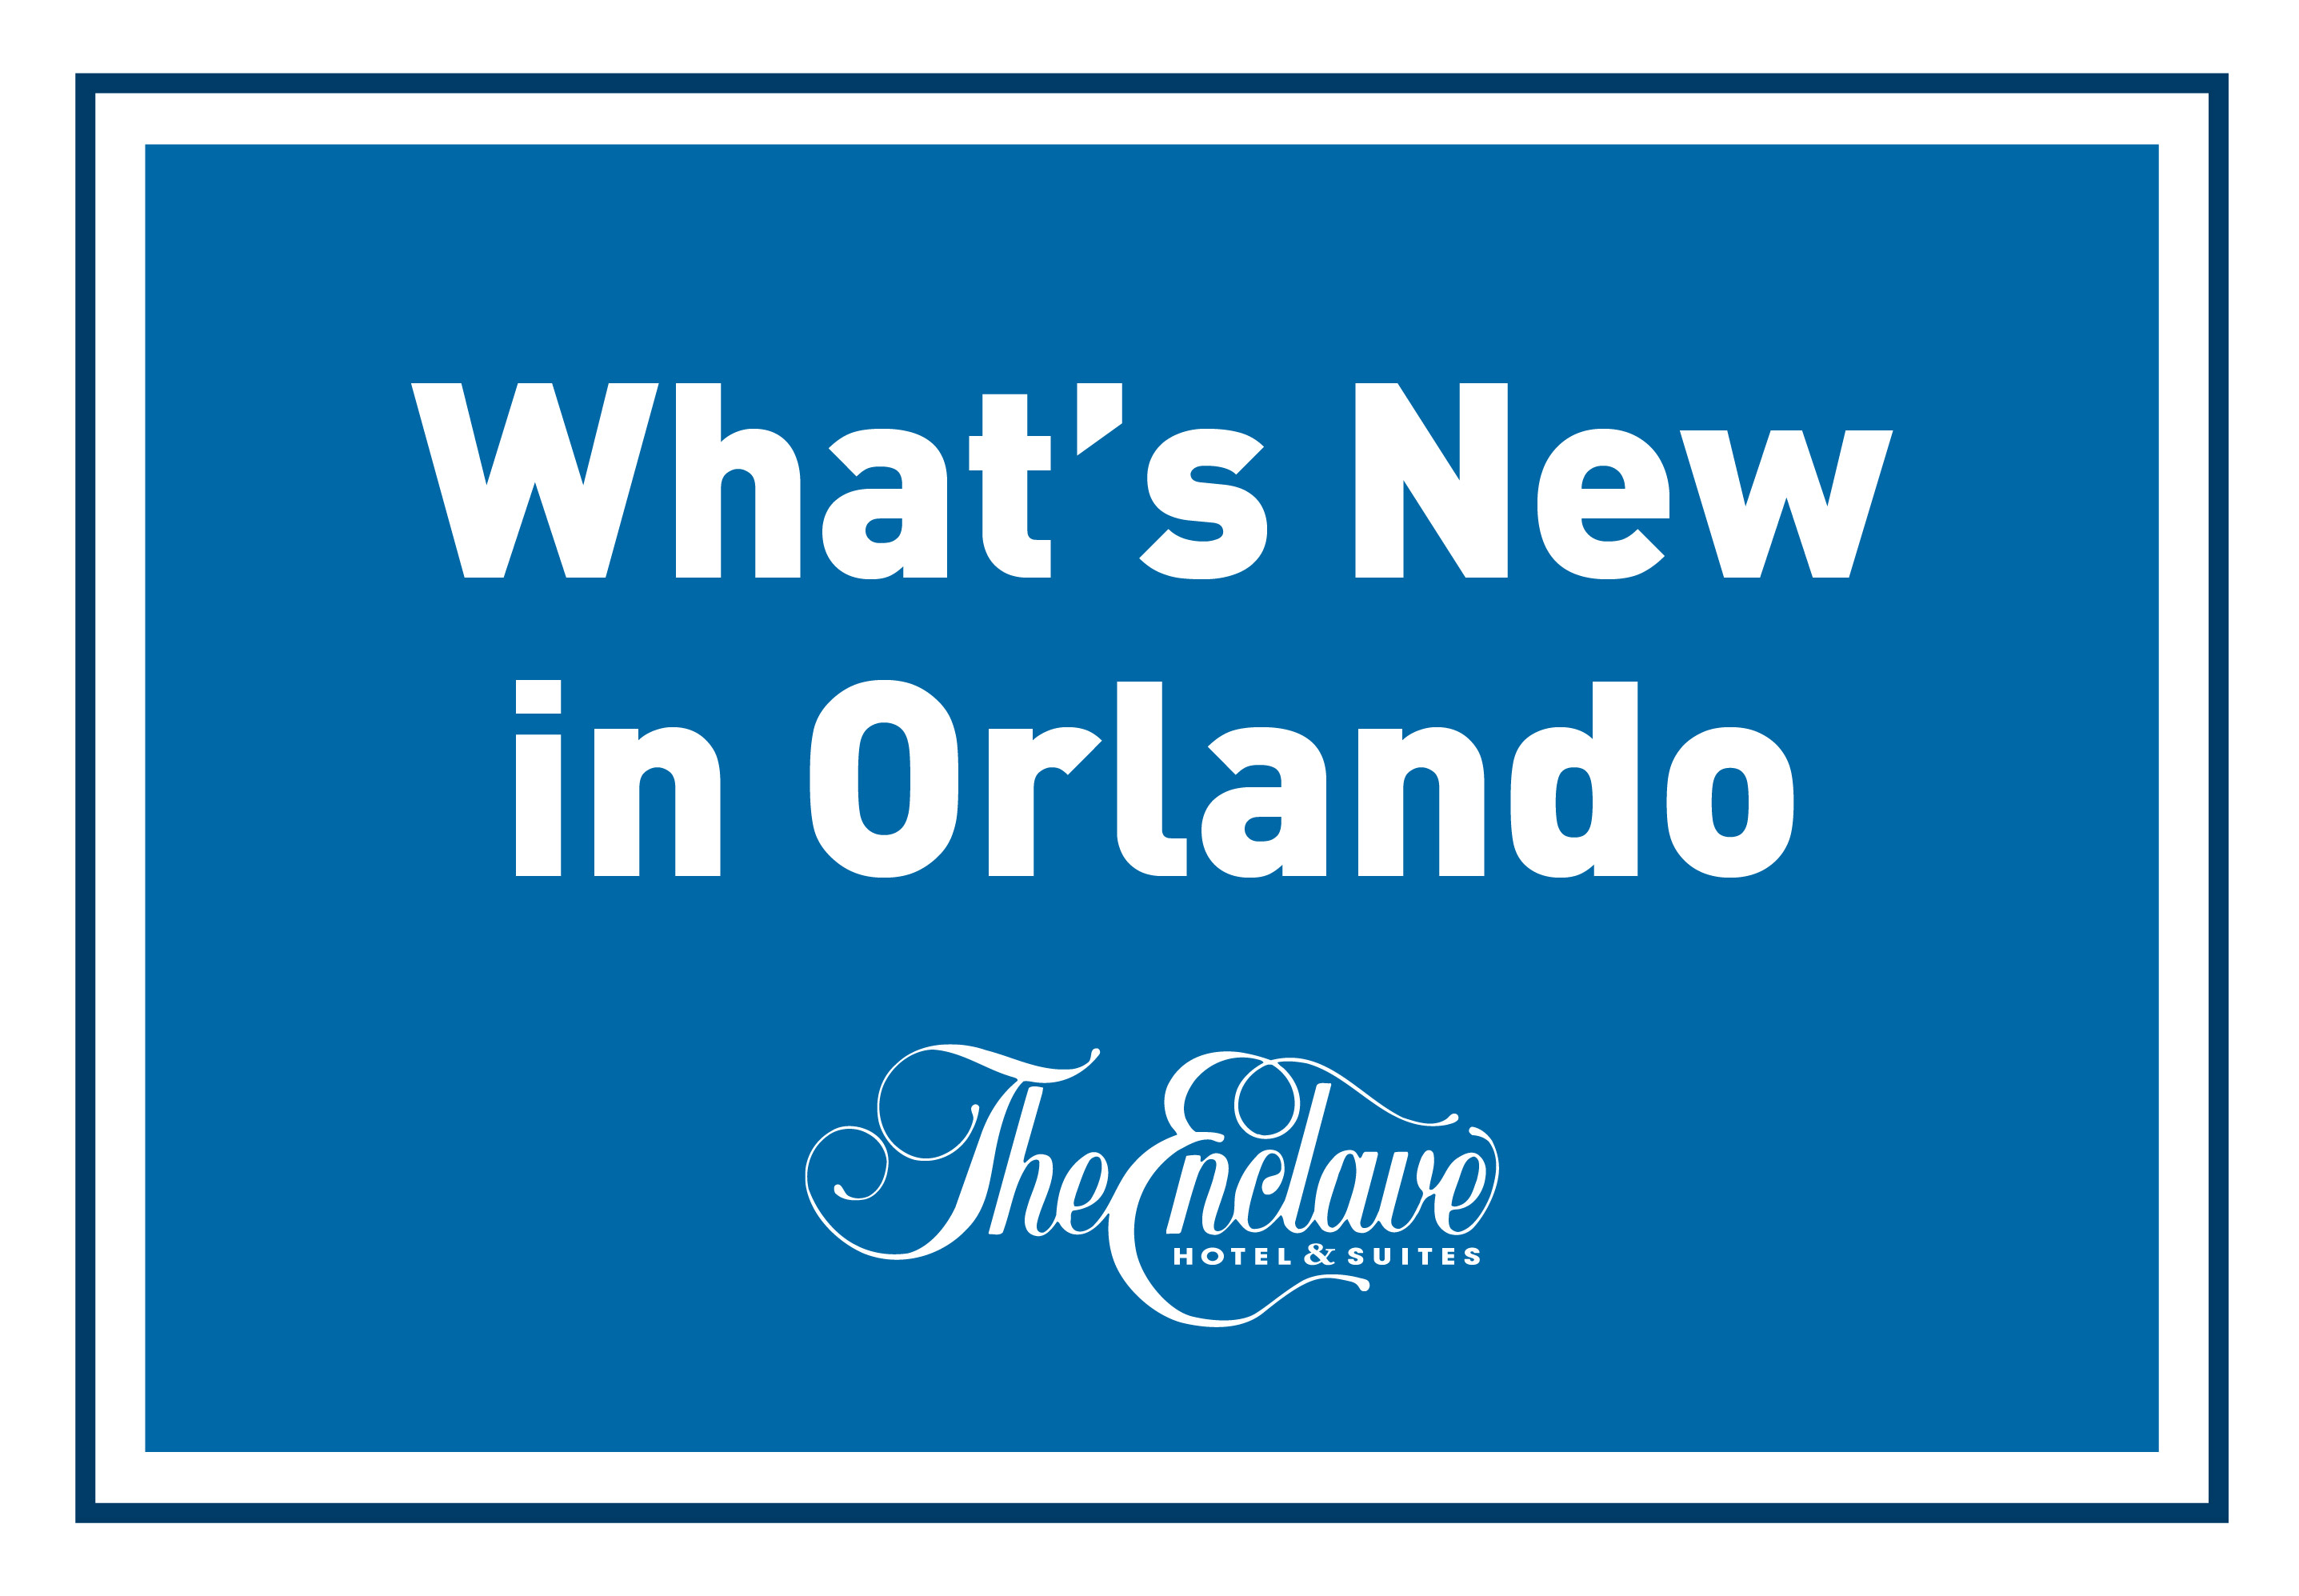 What's New in Orlando